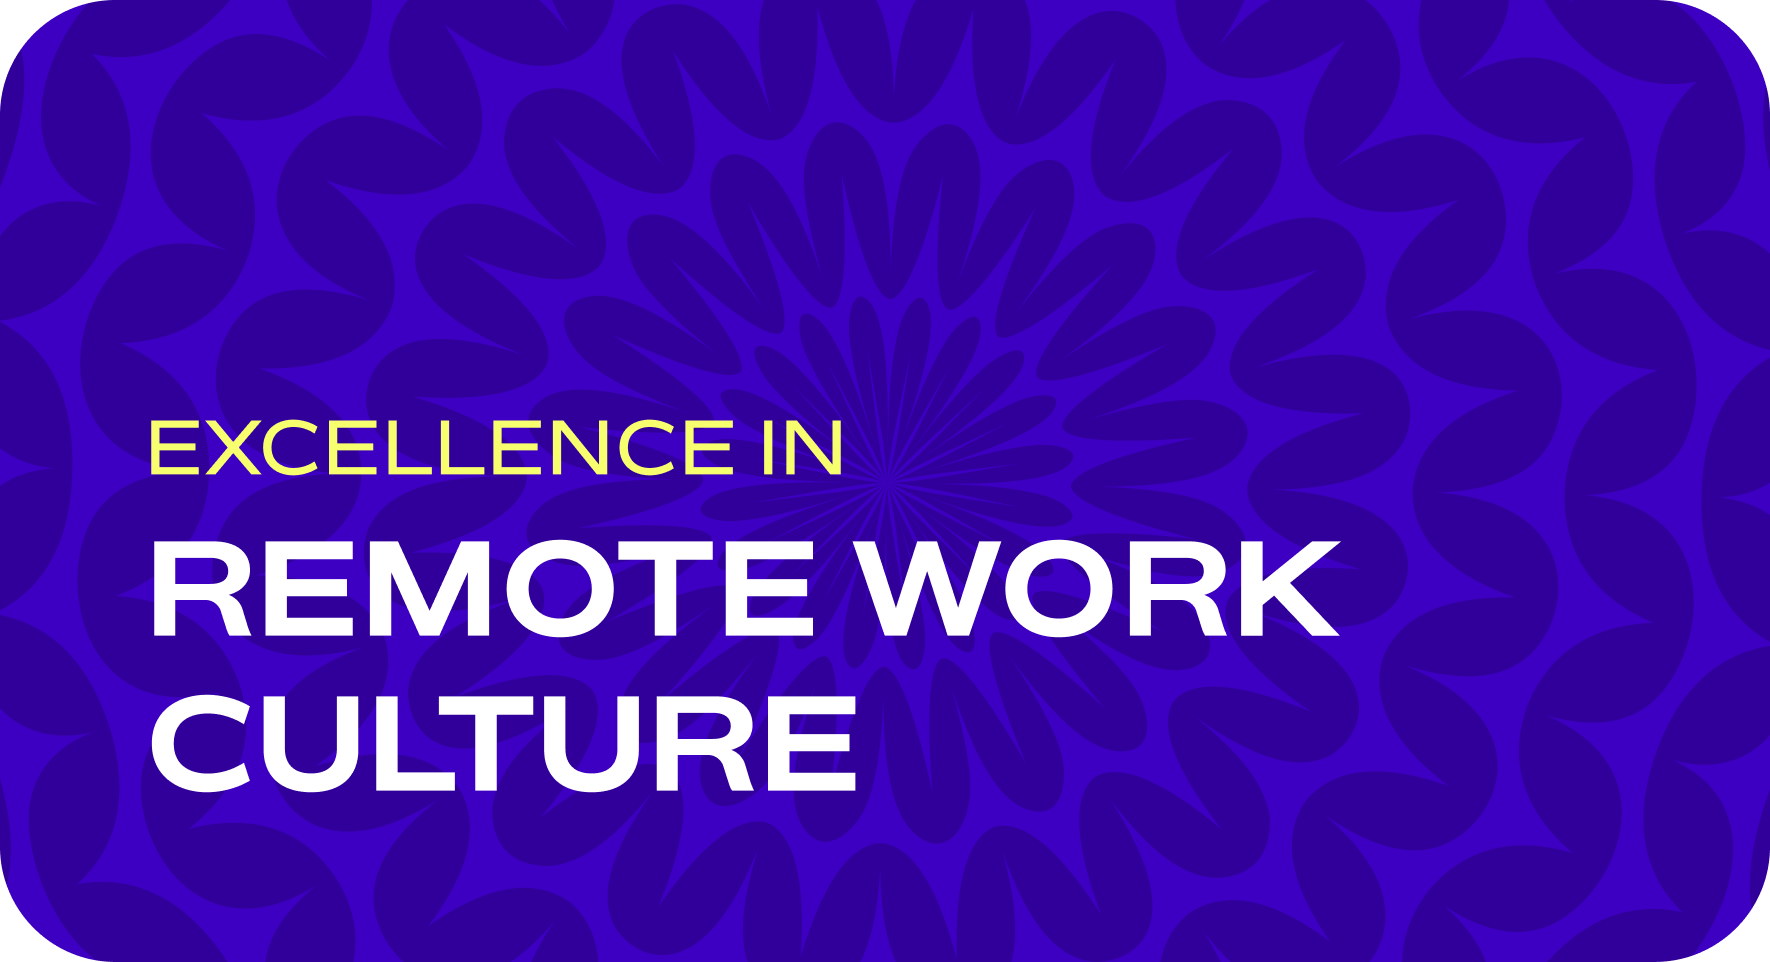 Excellence in remote work culture.